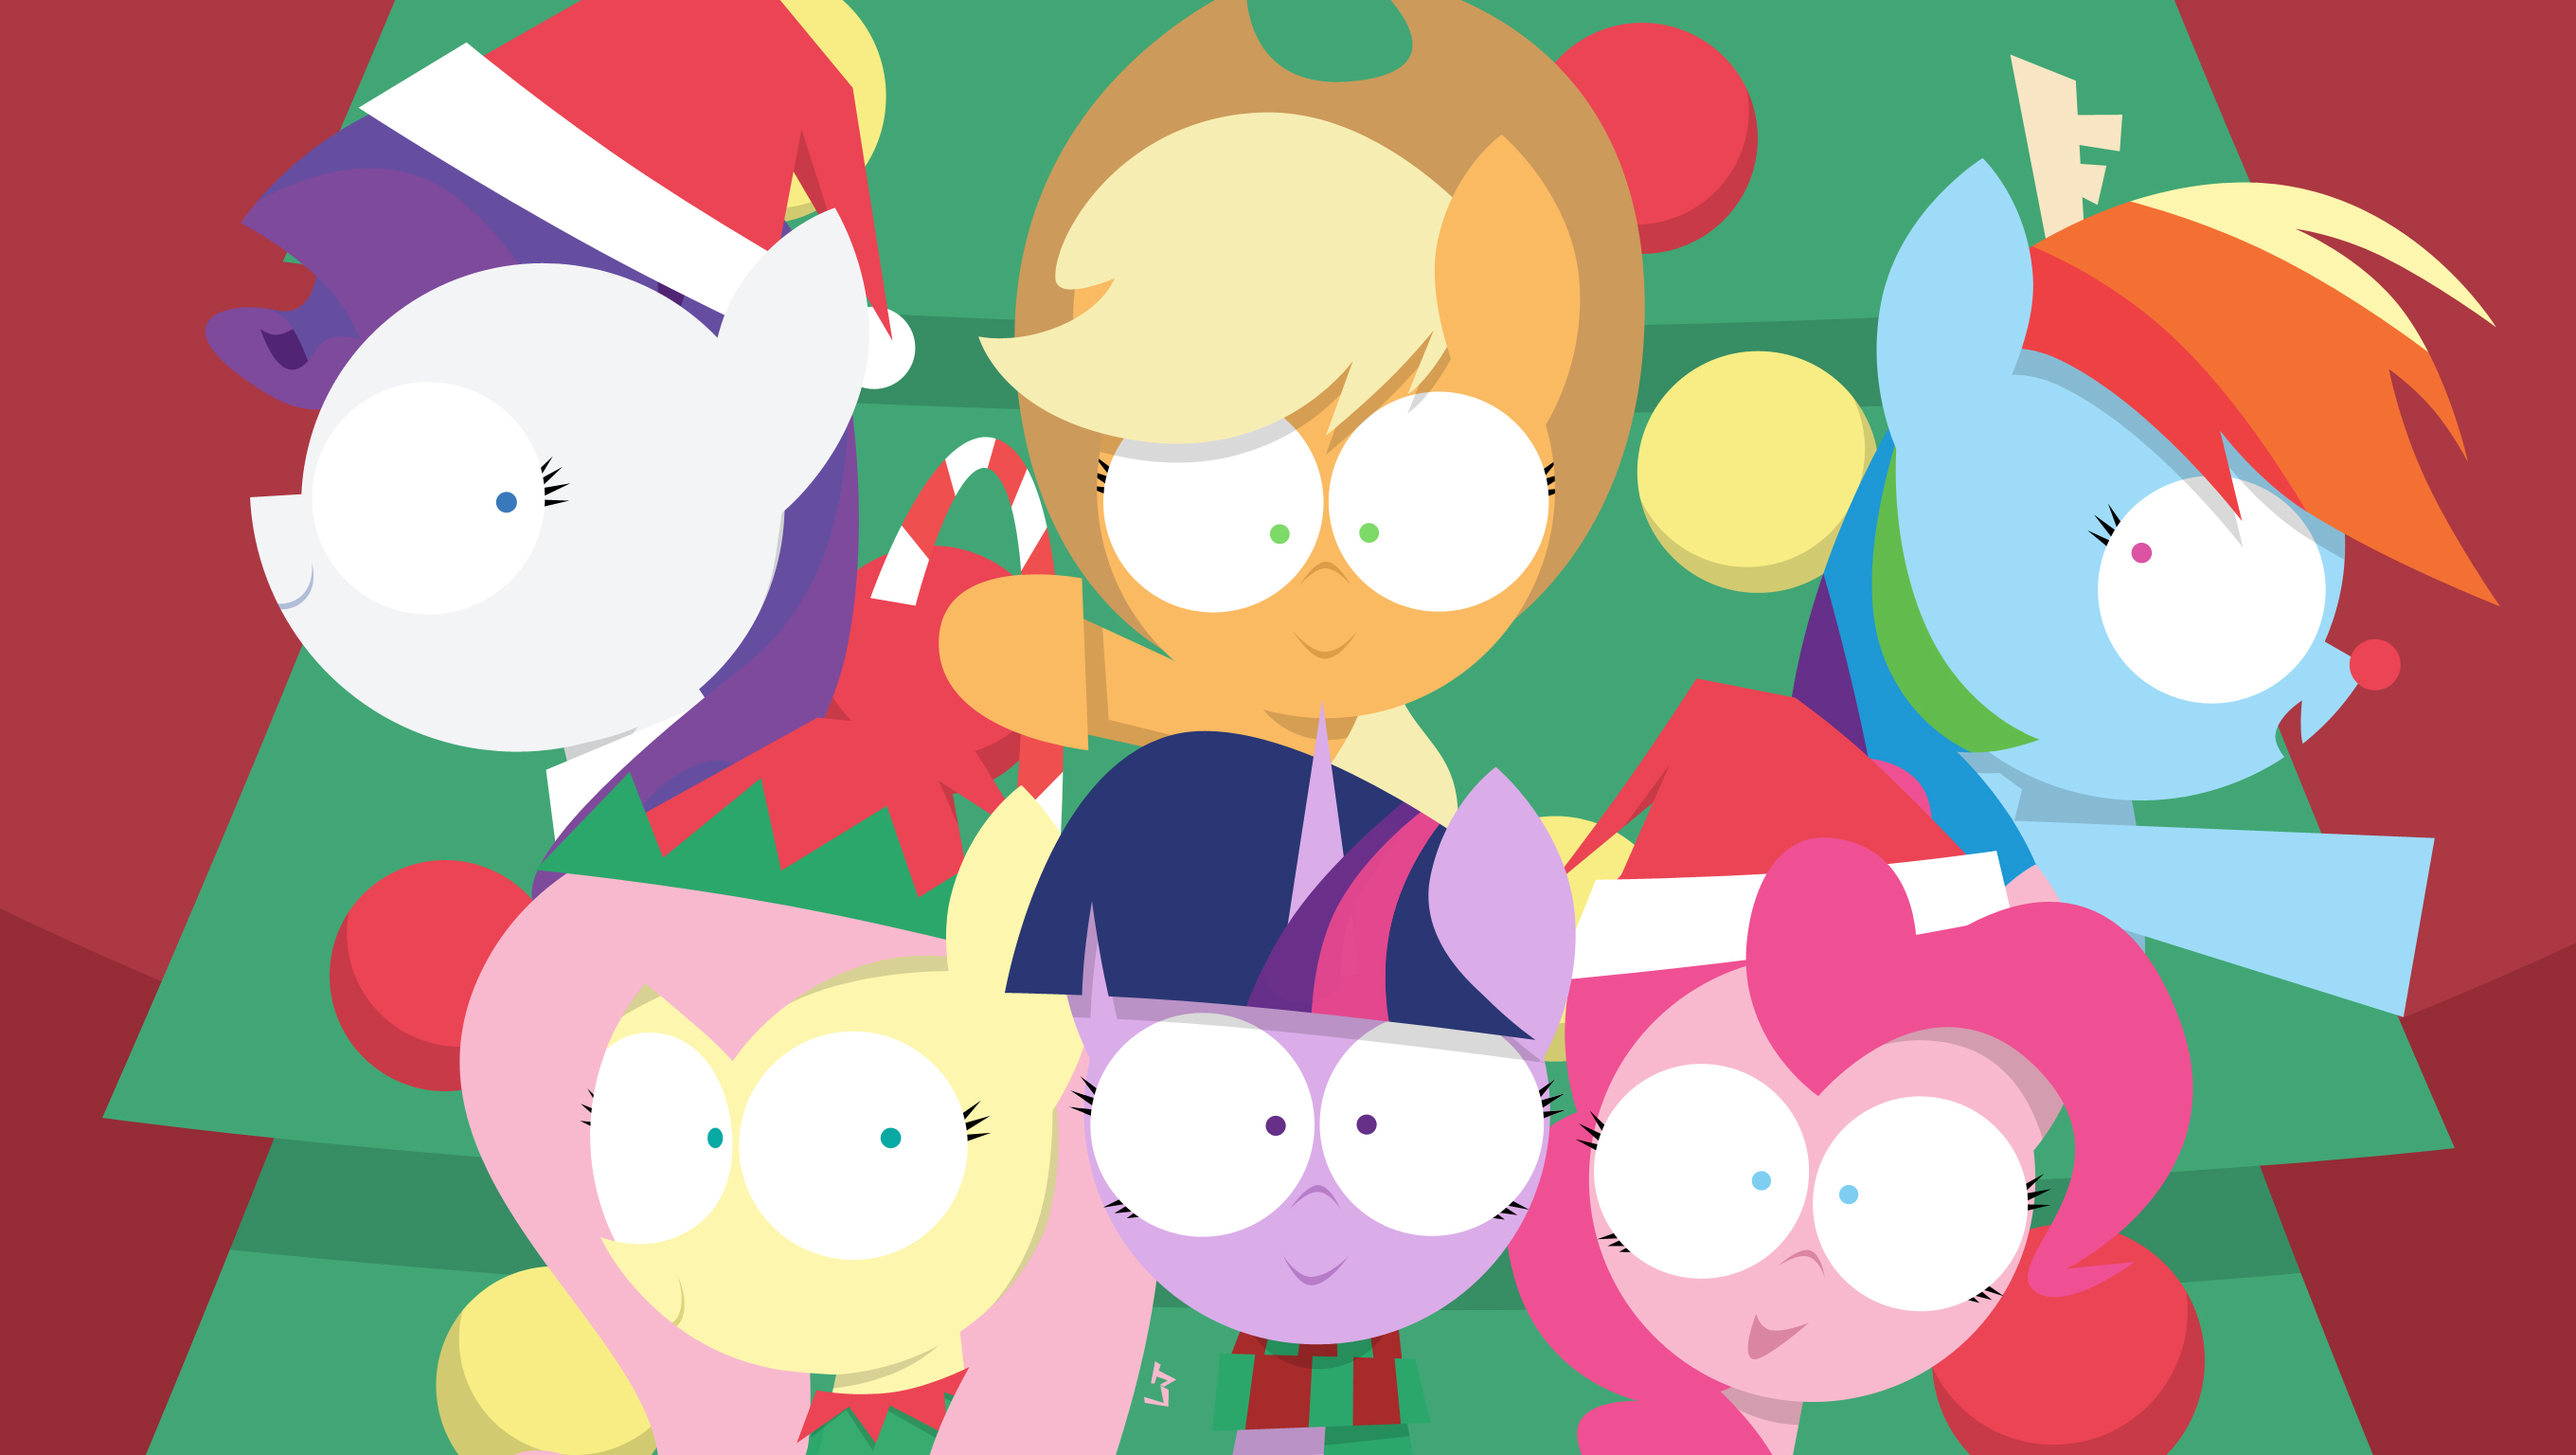 http://orig03.deviantart.net/4152/f/2015/359/a/b/it_s_a_pony_kind_of_christmas_by_limejerry-d9lei4g.jpg